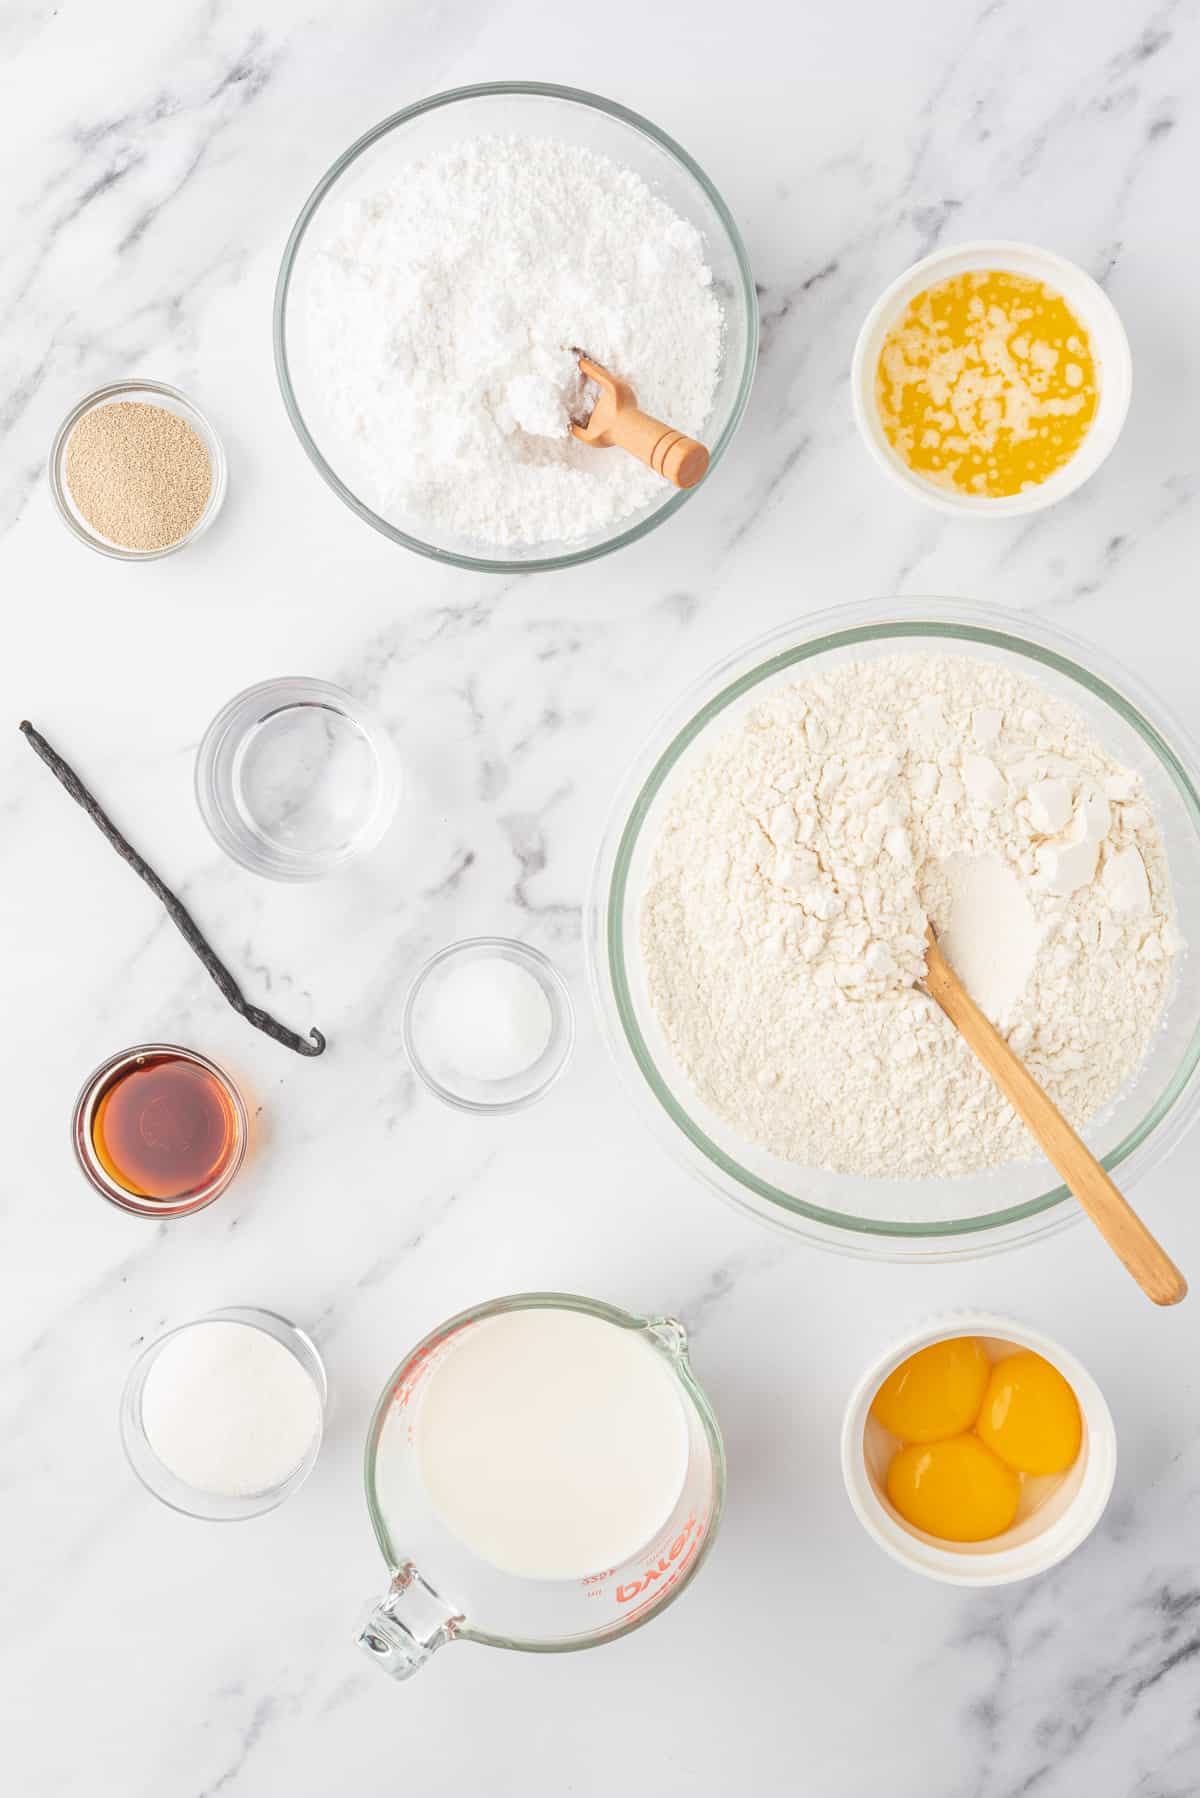 The ingredients for glazed vanilla donuts are spread out on a white surface.